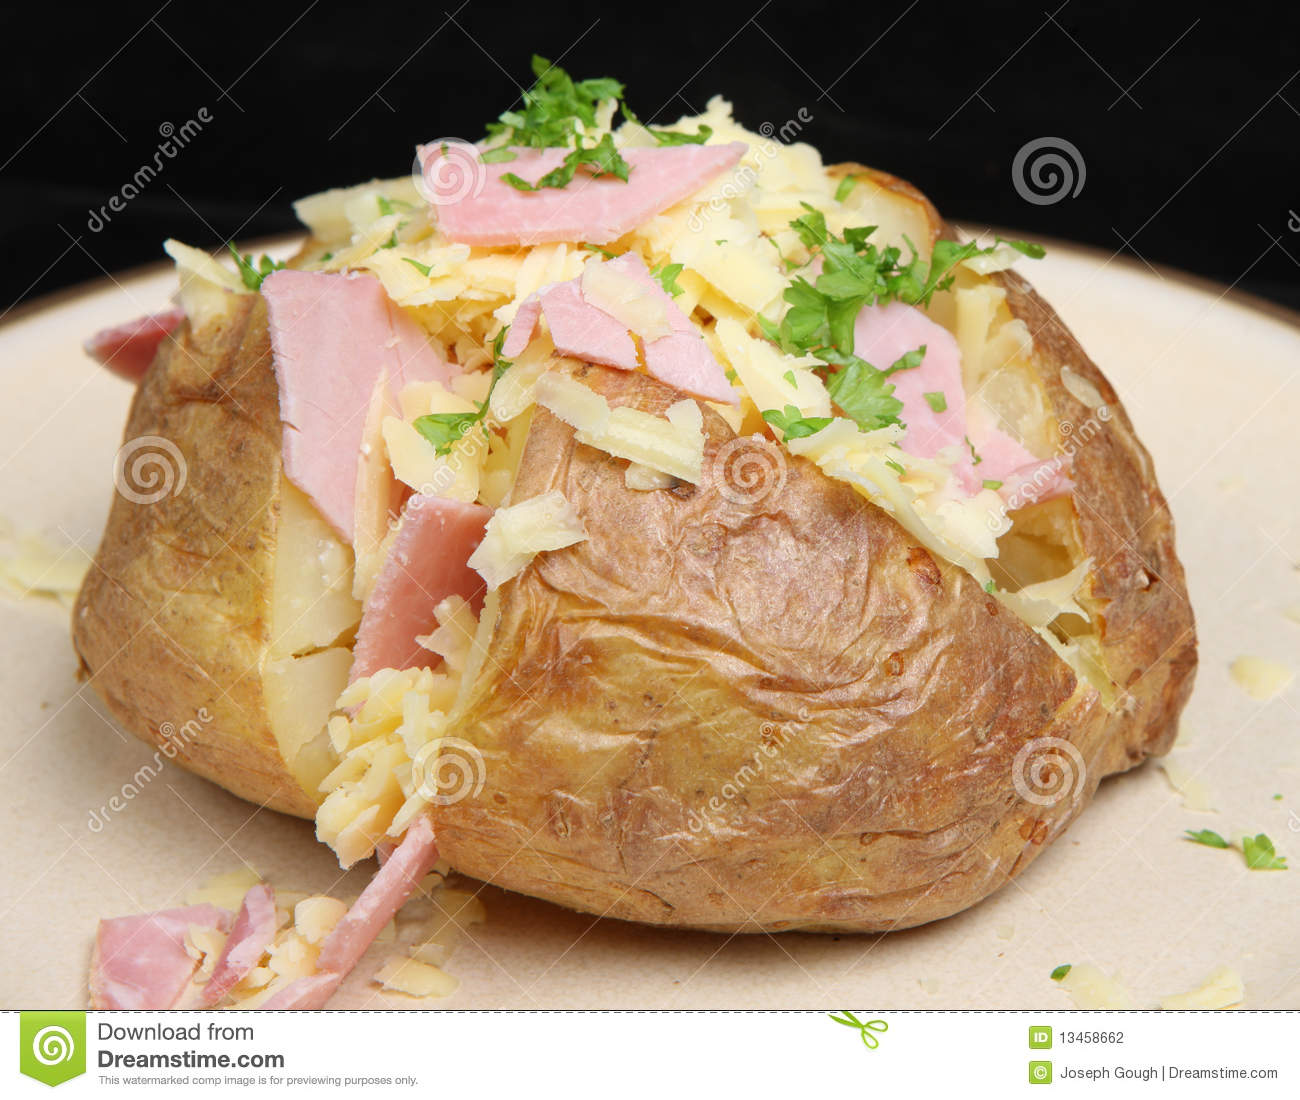 Jacket Potato Filled With Grated Cheddar Cheese And Ham 